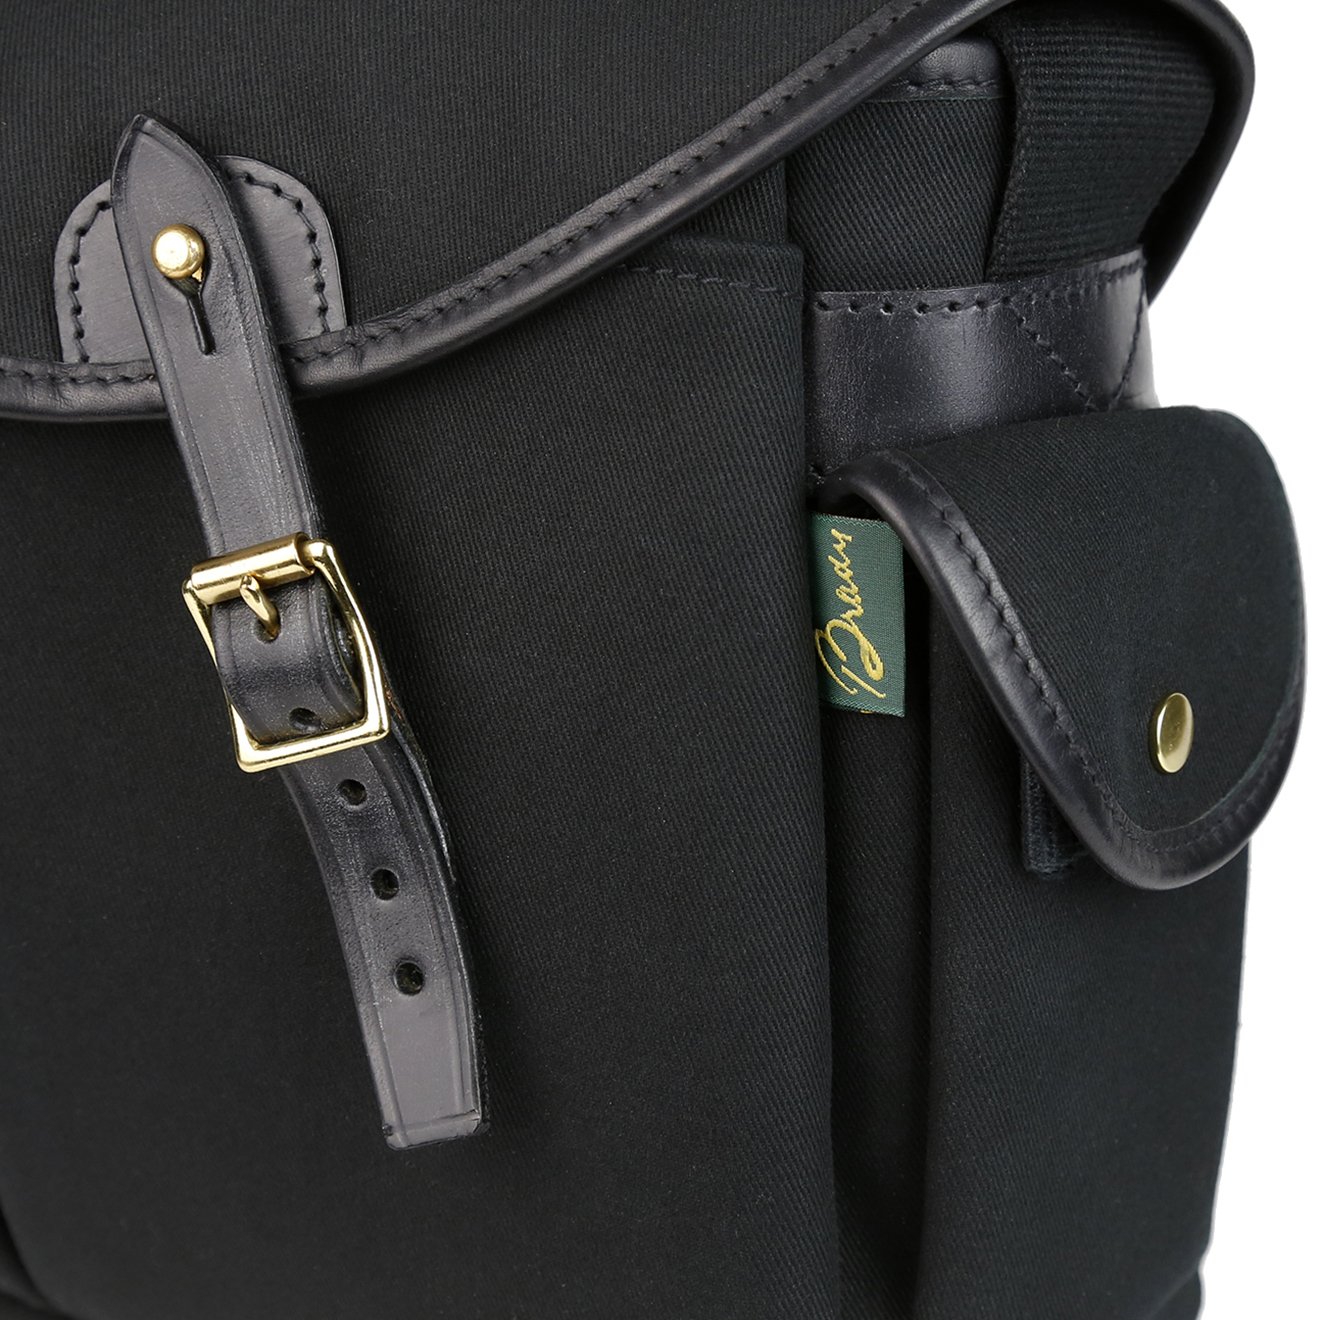 Kennet Camera Bag from Brady Bags